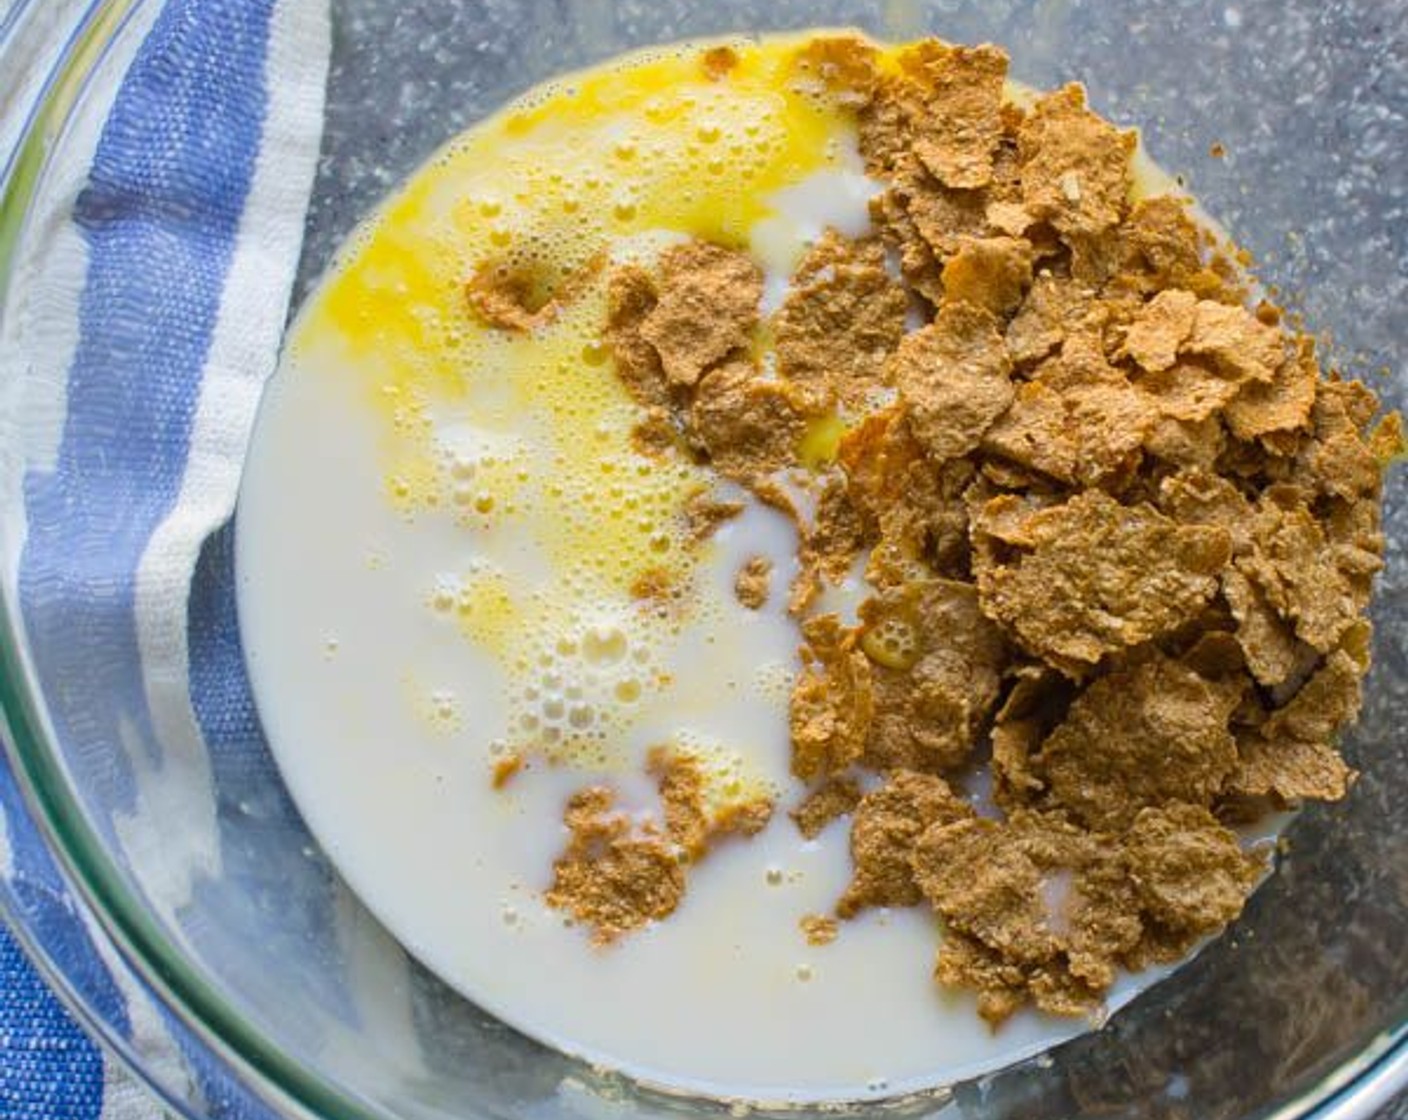 step 3 In a large bowl, lightly beat the Eggs (2). Stir in Raisin Bran Cereal (1 1/2 cups), Almond Milk (1 1/2 cups), Vegetable Oil (1/4 cup) and Vanilla Extract (1 tsp). Let stand 10 minutes; then stir to break up cereal.